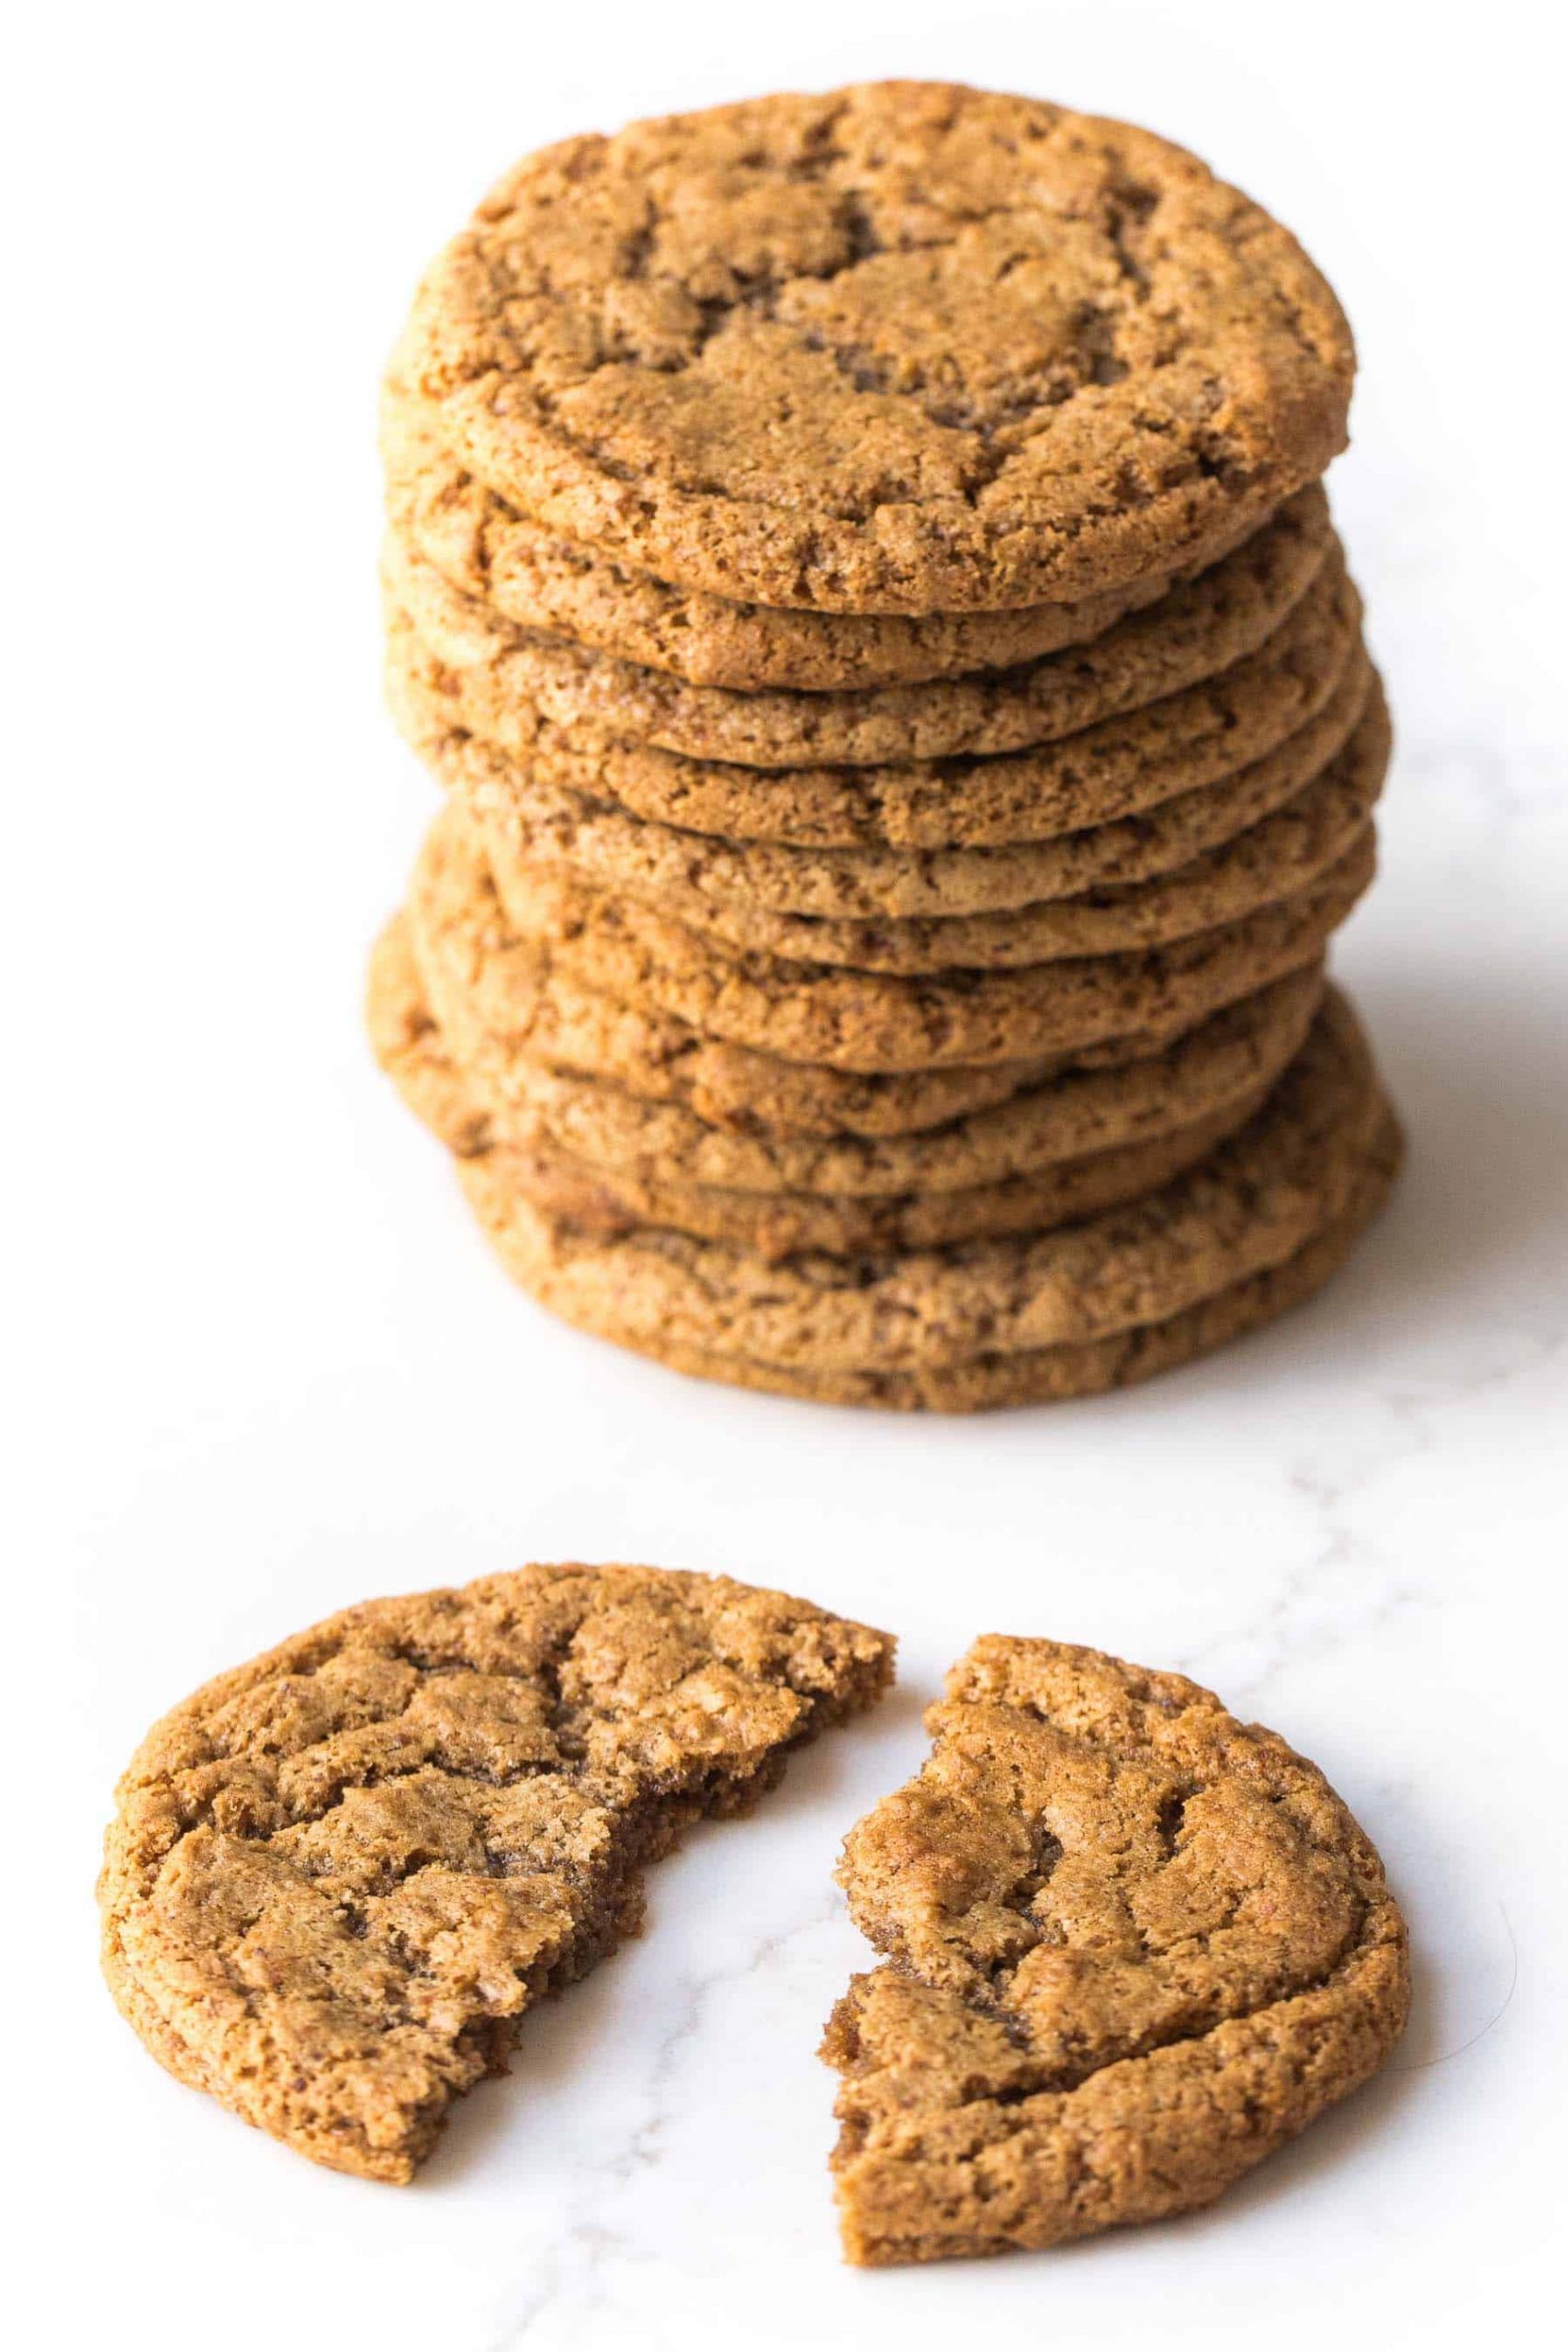 Paleo Almond Butter Cookies
 Paleo Almond Butter Cookies Tastes Lovely